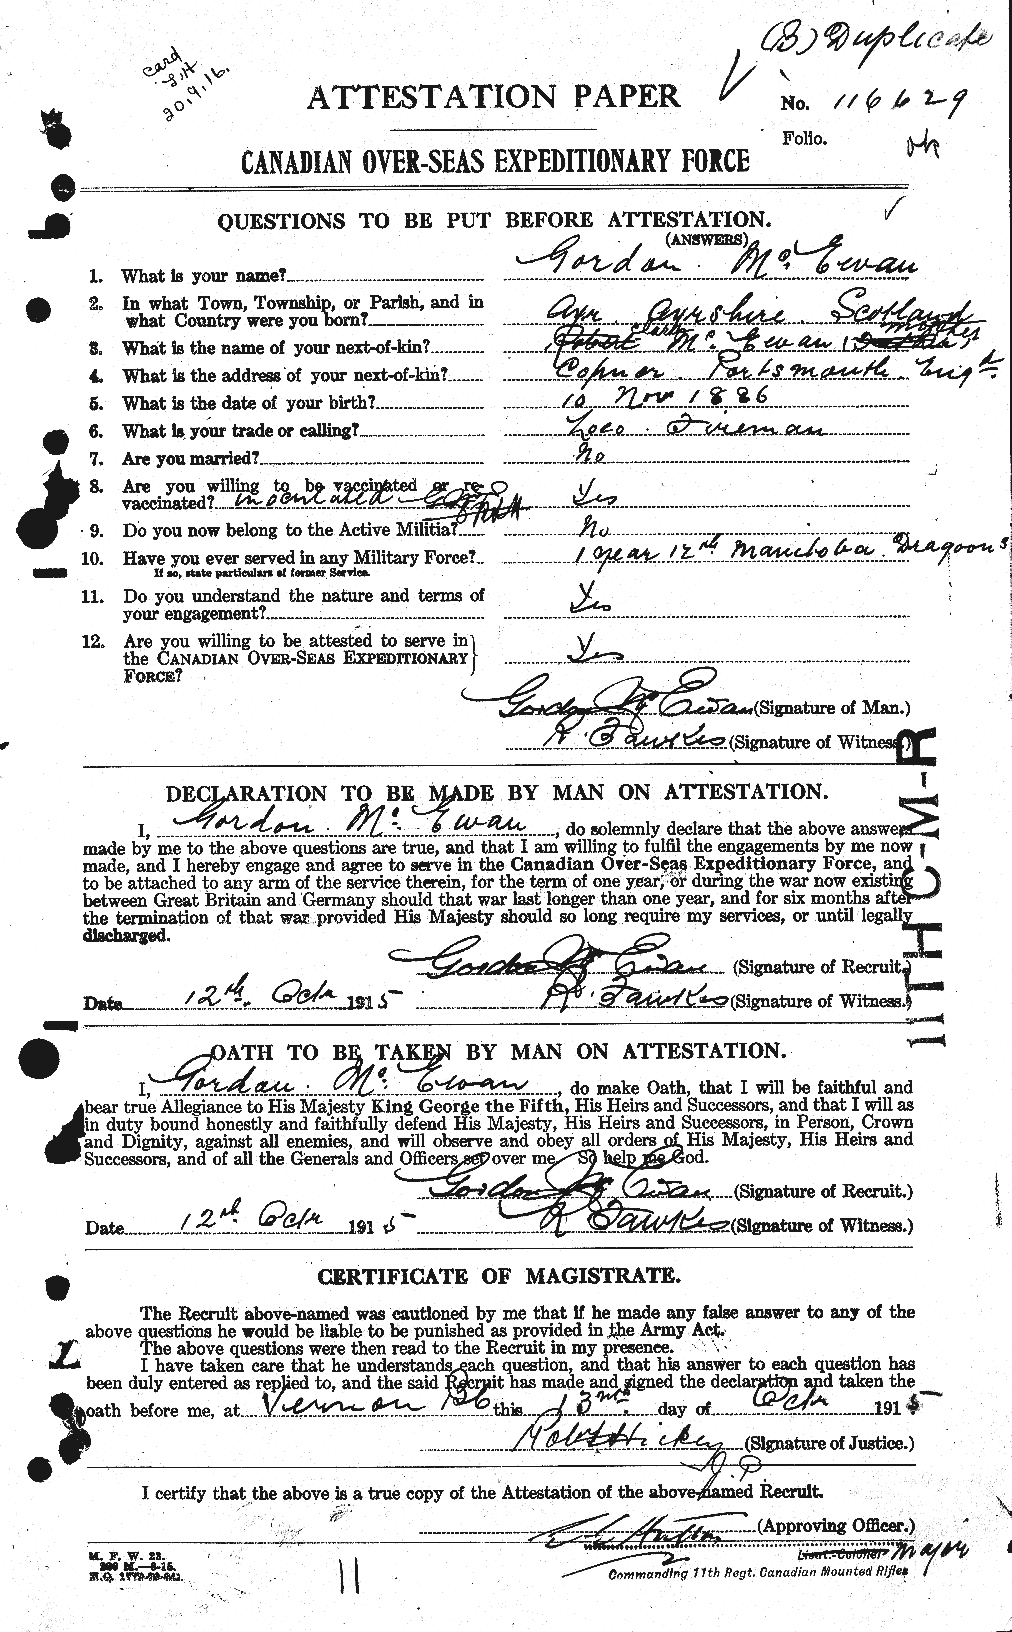 Personnel Records of the First World War - CEF 522220a